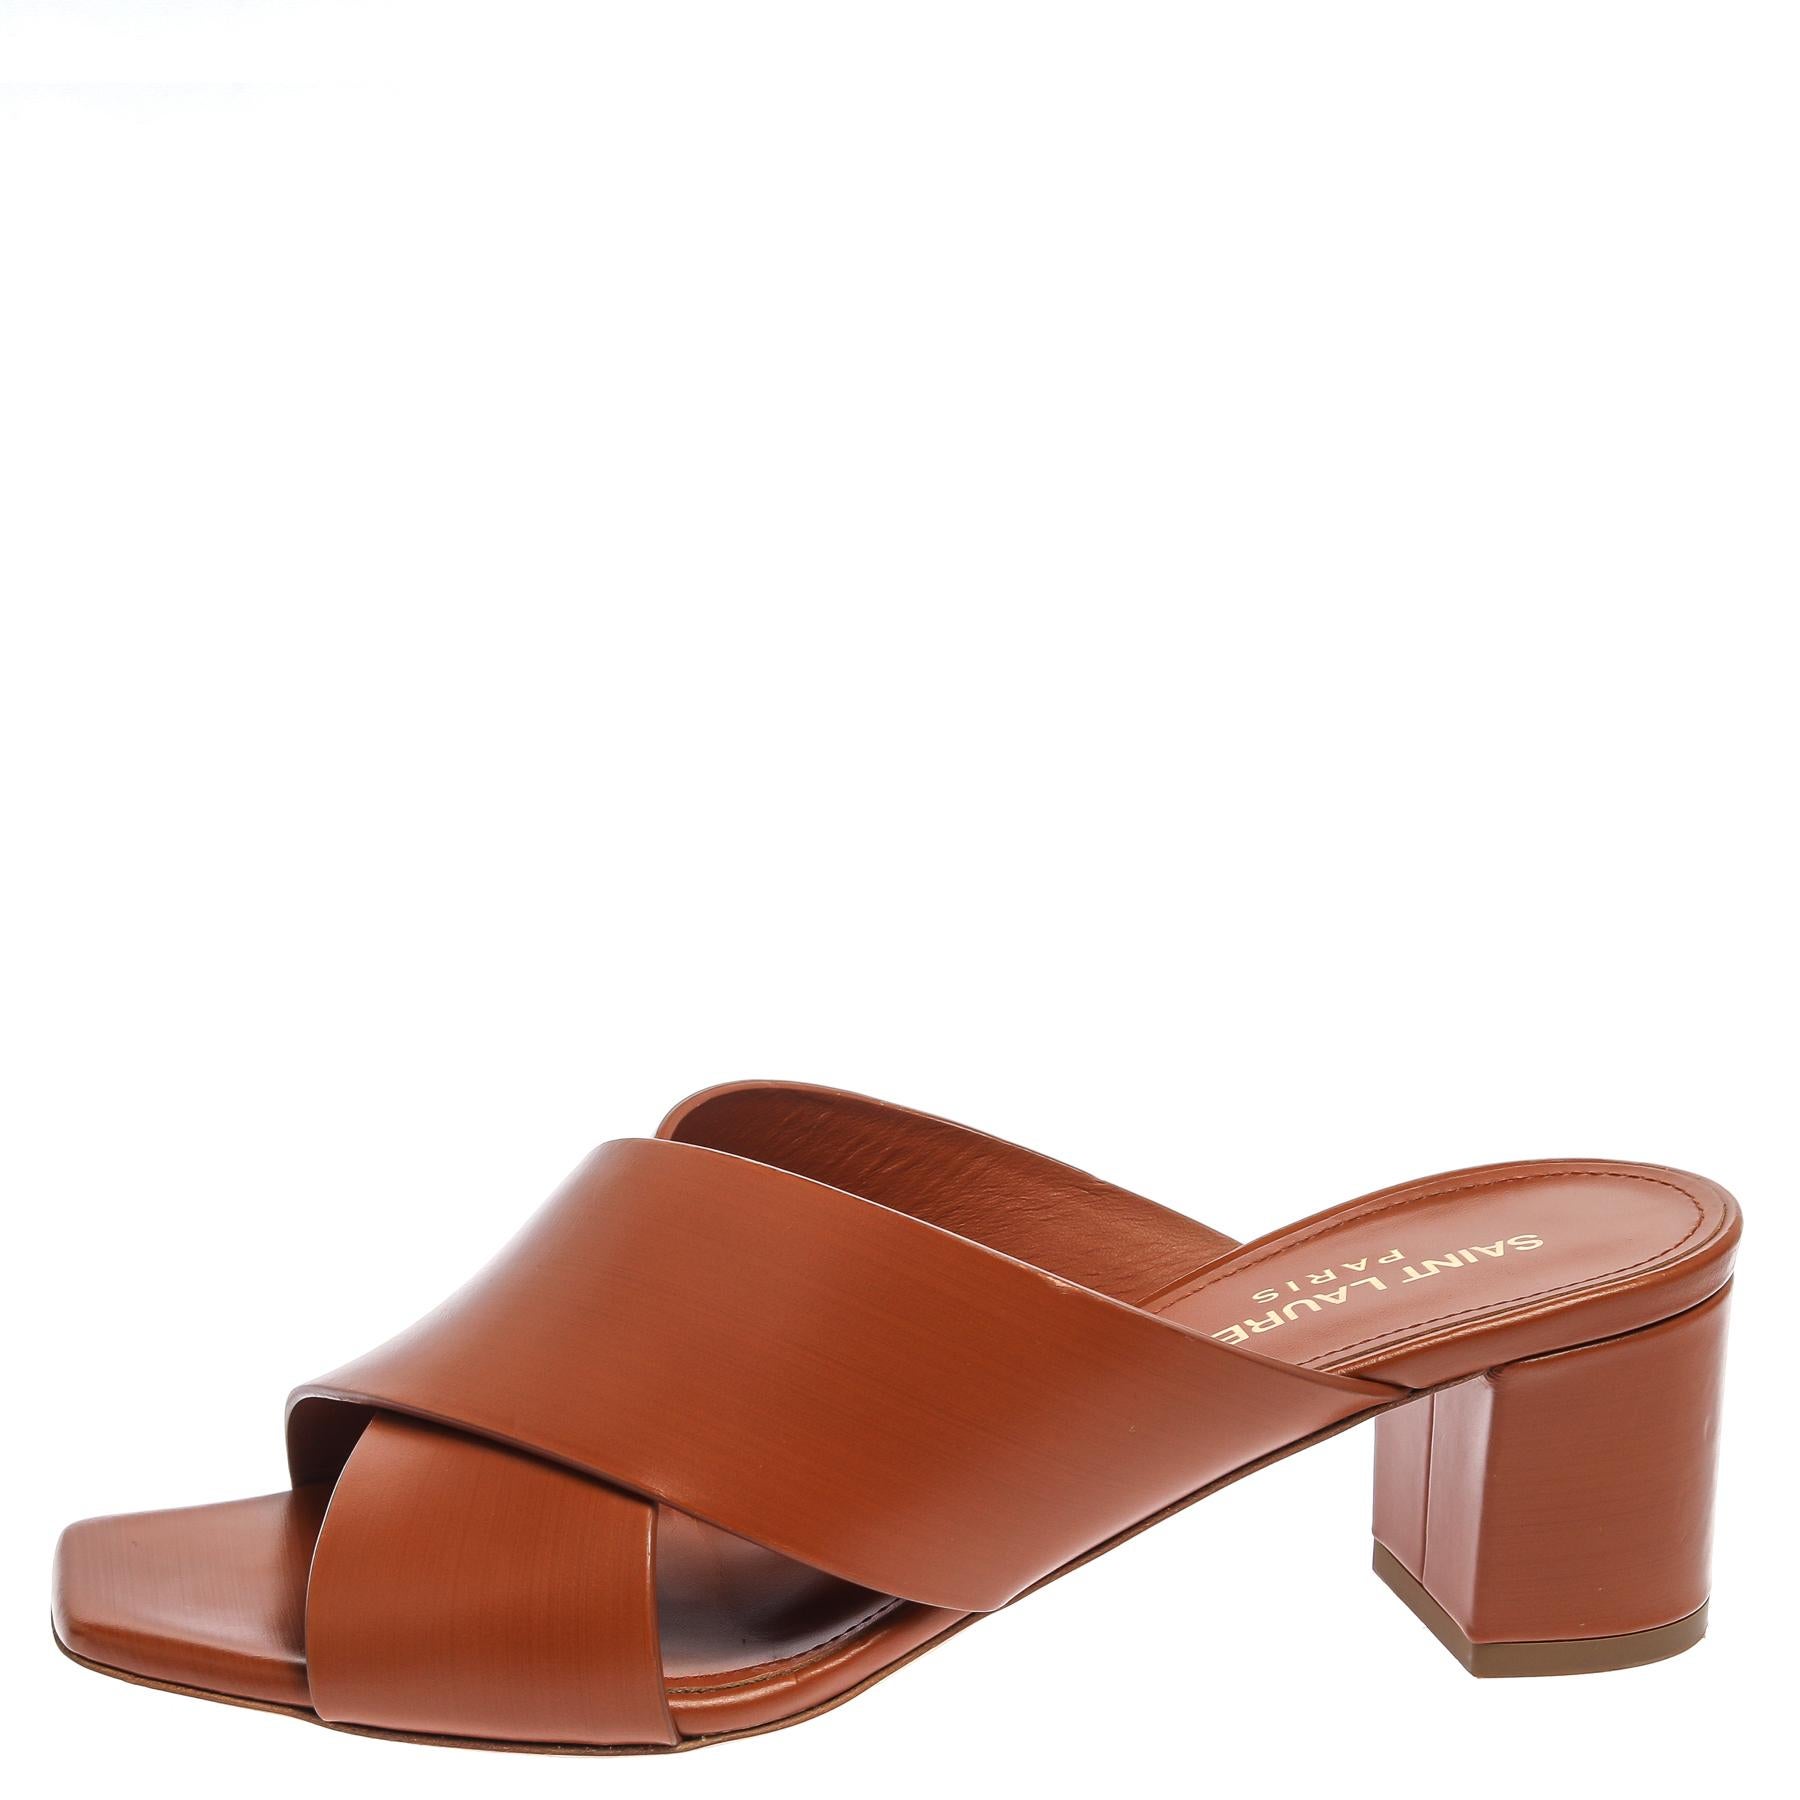 Charm your way to all your social gatherings in this pair of mules from Saint Laurent Paris. Crafted from brown leather, they carry a feminine design with criss-cross straps and beautiful block heels.

Includes: Original Dustbag, Original Box, Info